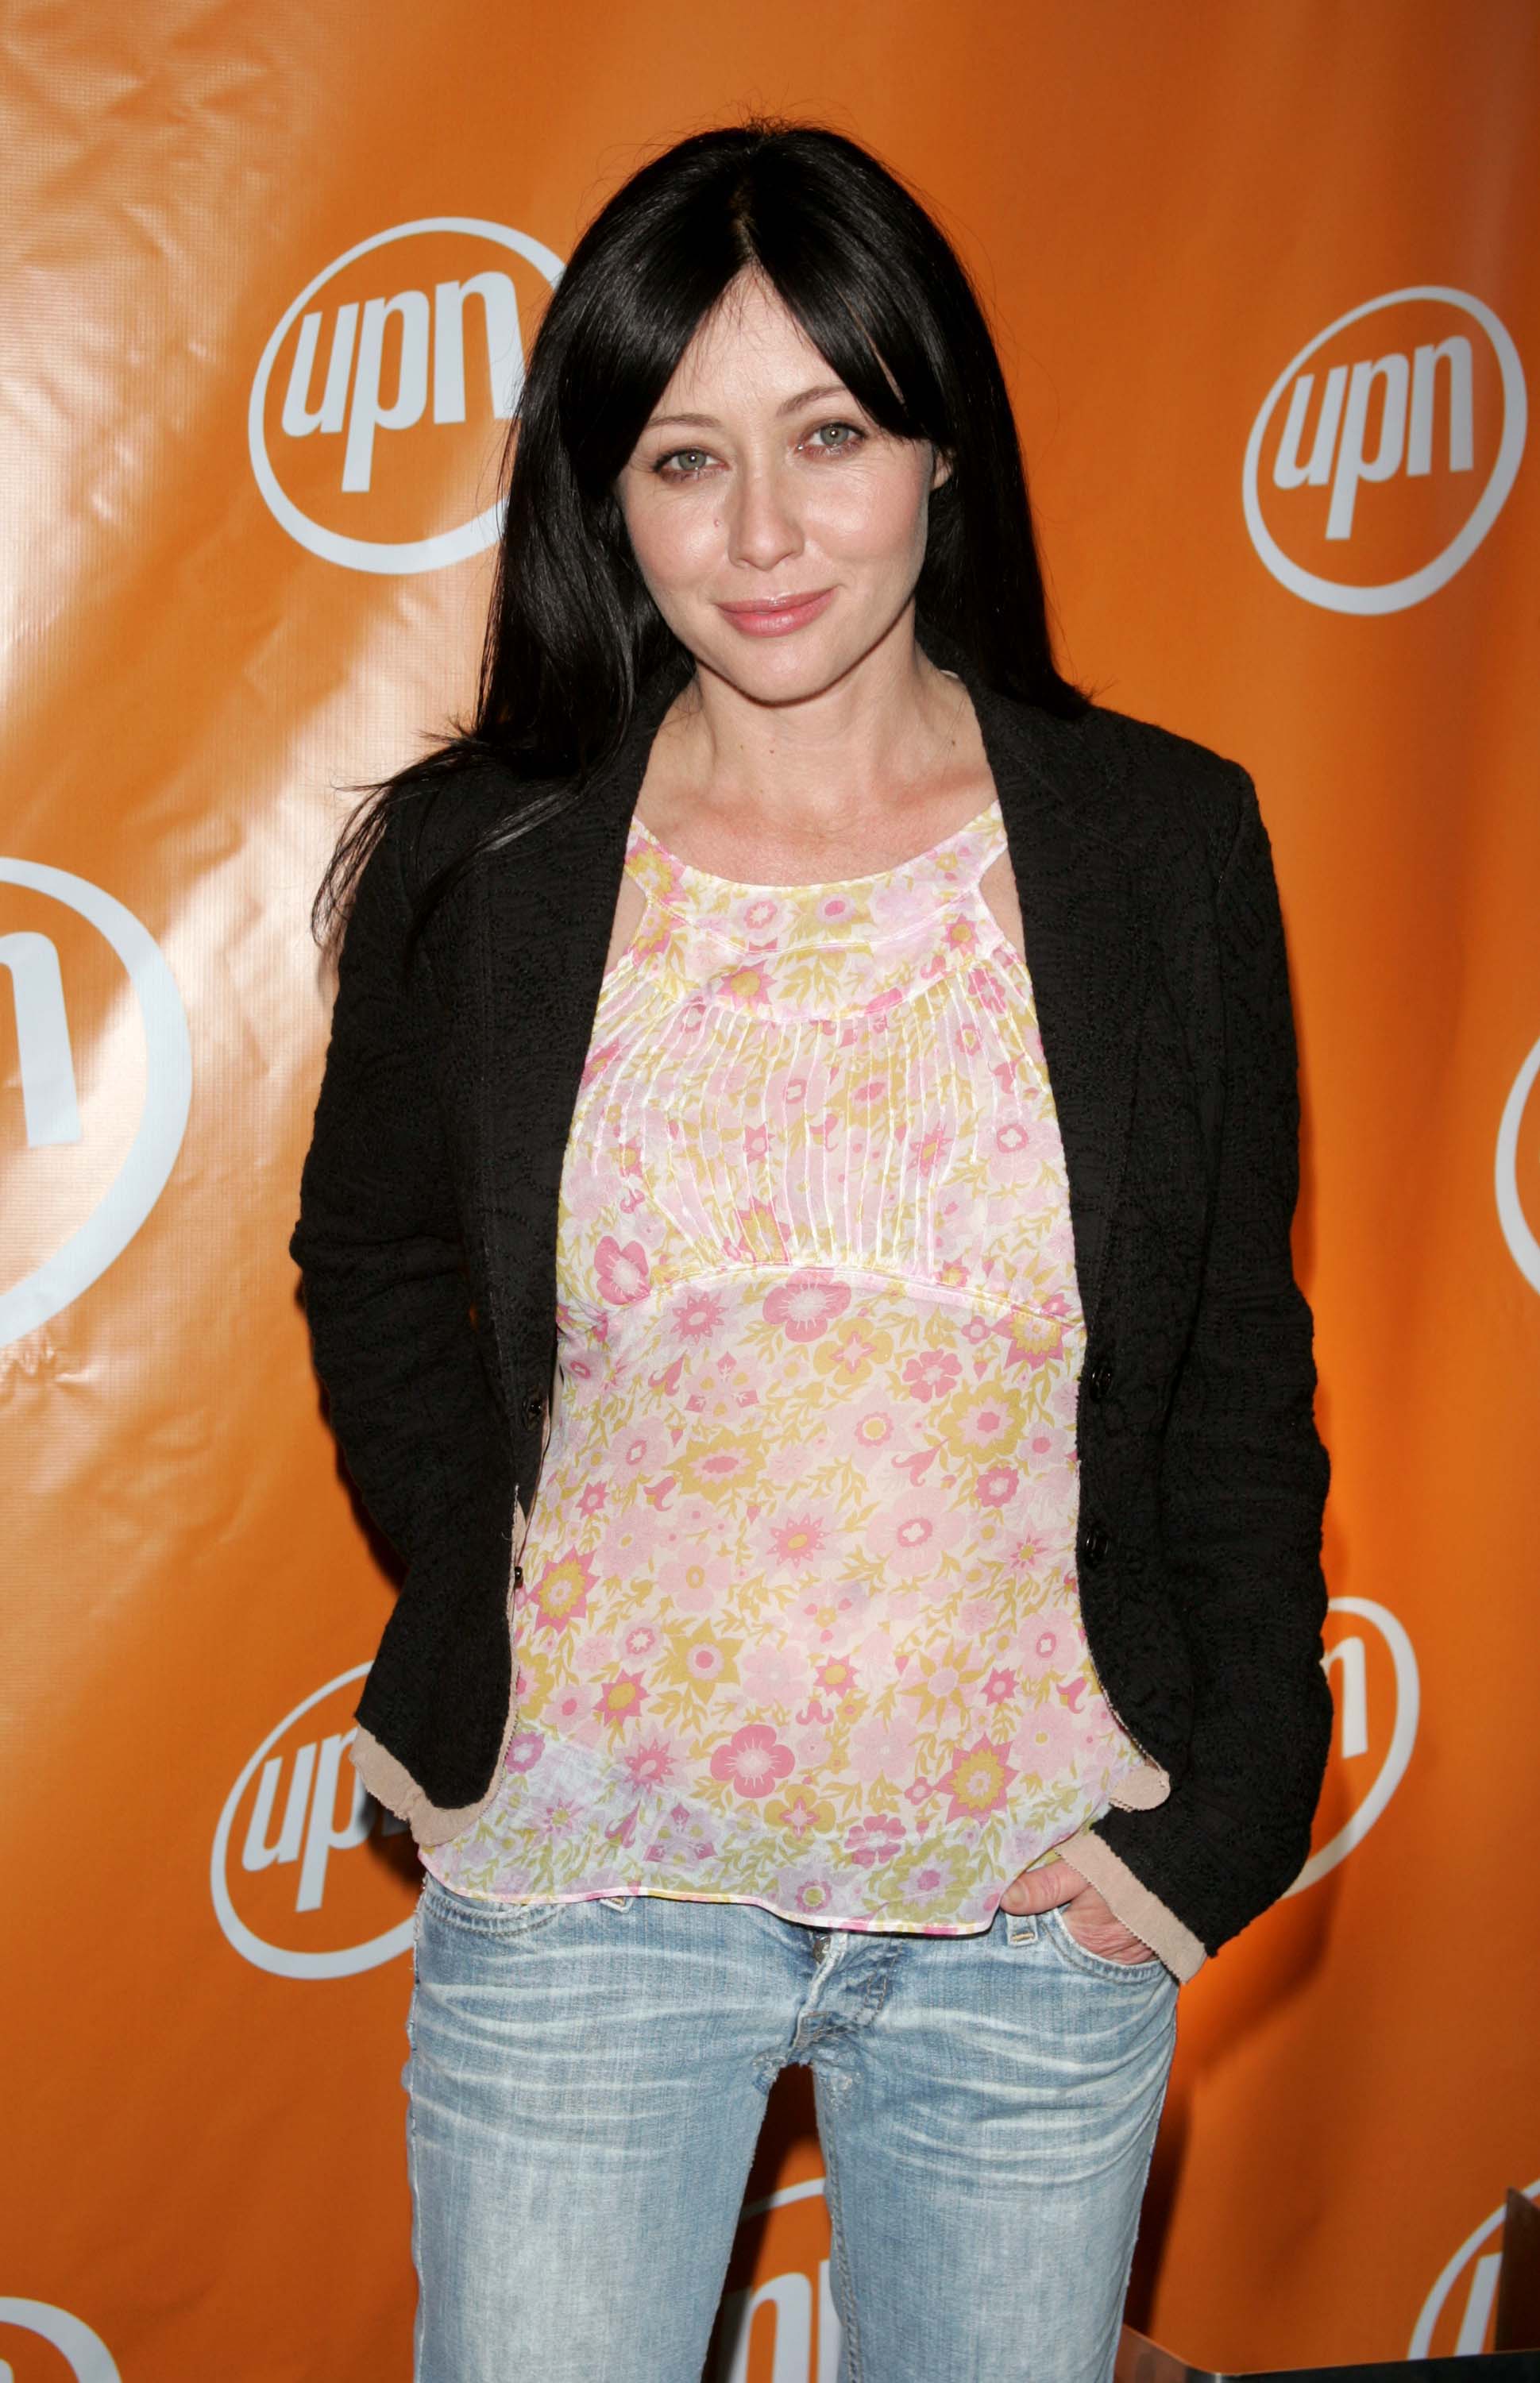 Shannen Doherty during UPN 2005/2006 UpFront - Arrivals at Madison Square Garden in New York City on May 19, 2005 | Source: Getty Images